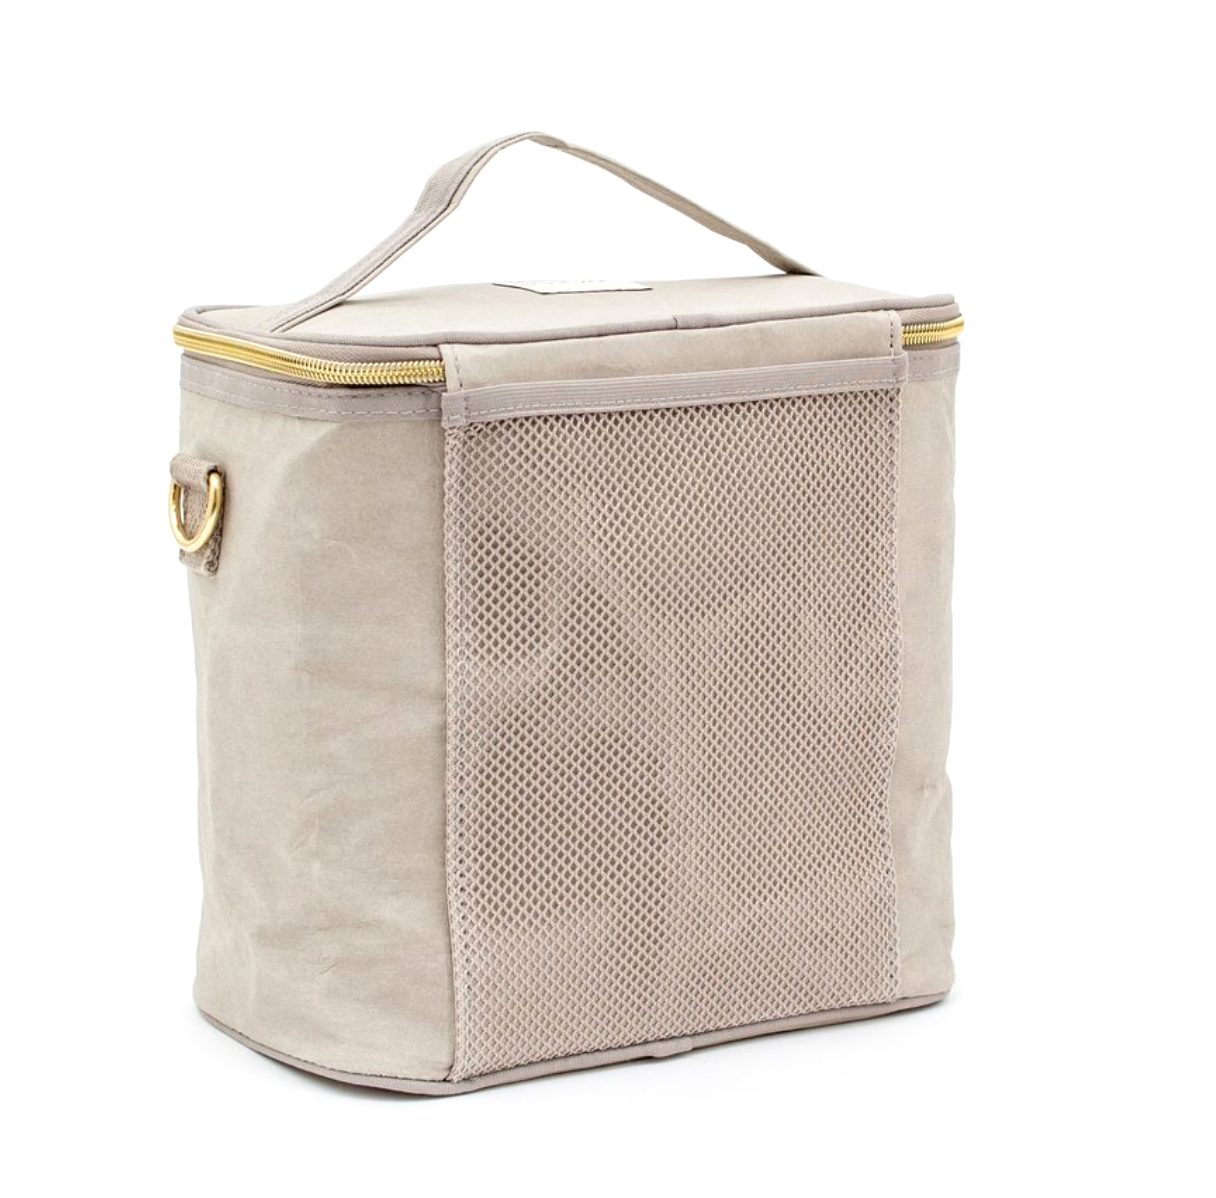 SoYoung + Lunch Poche Bag